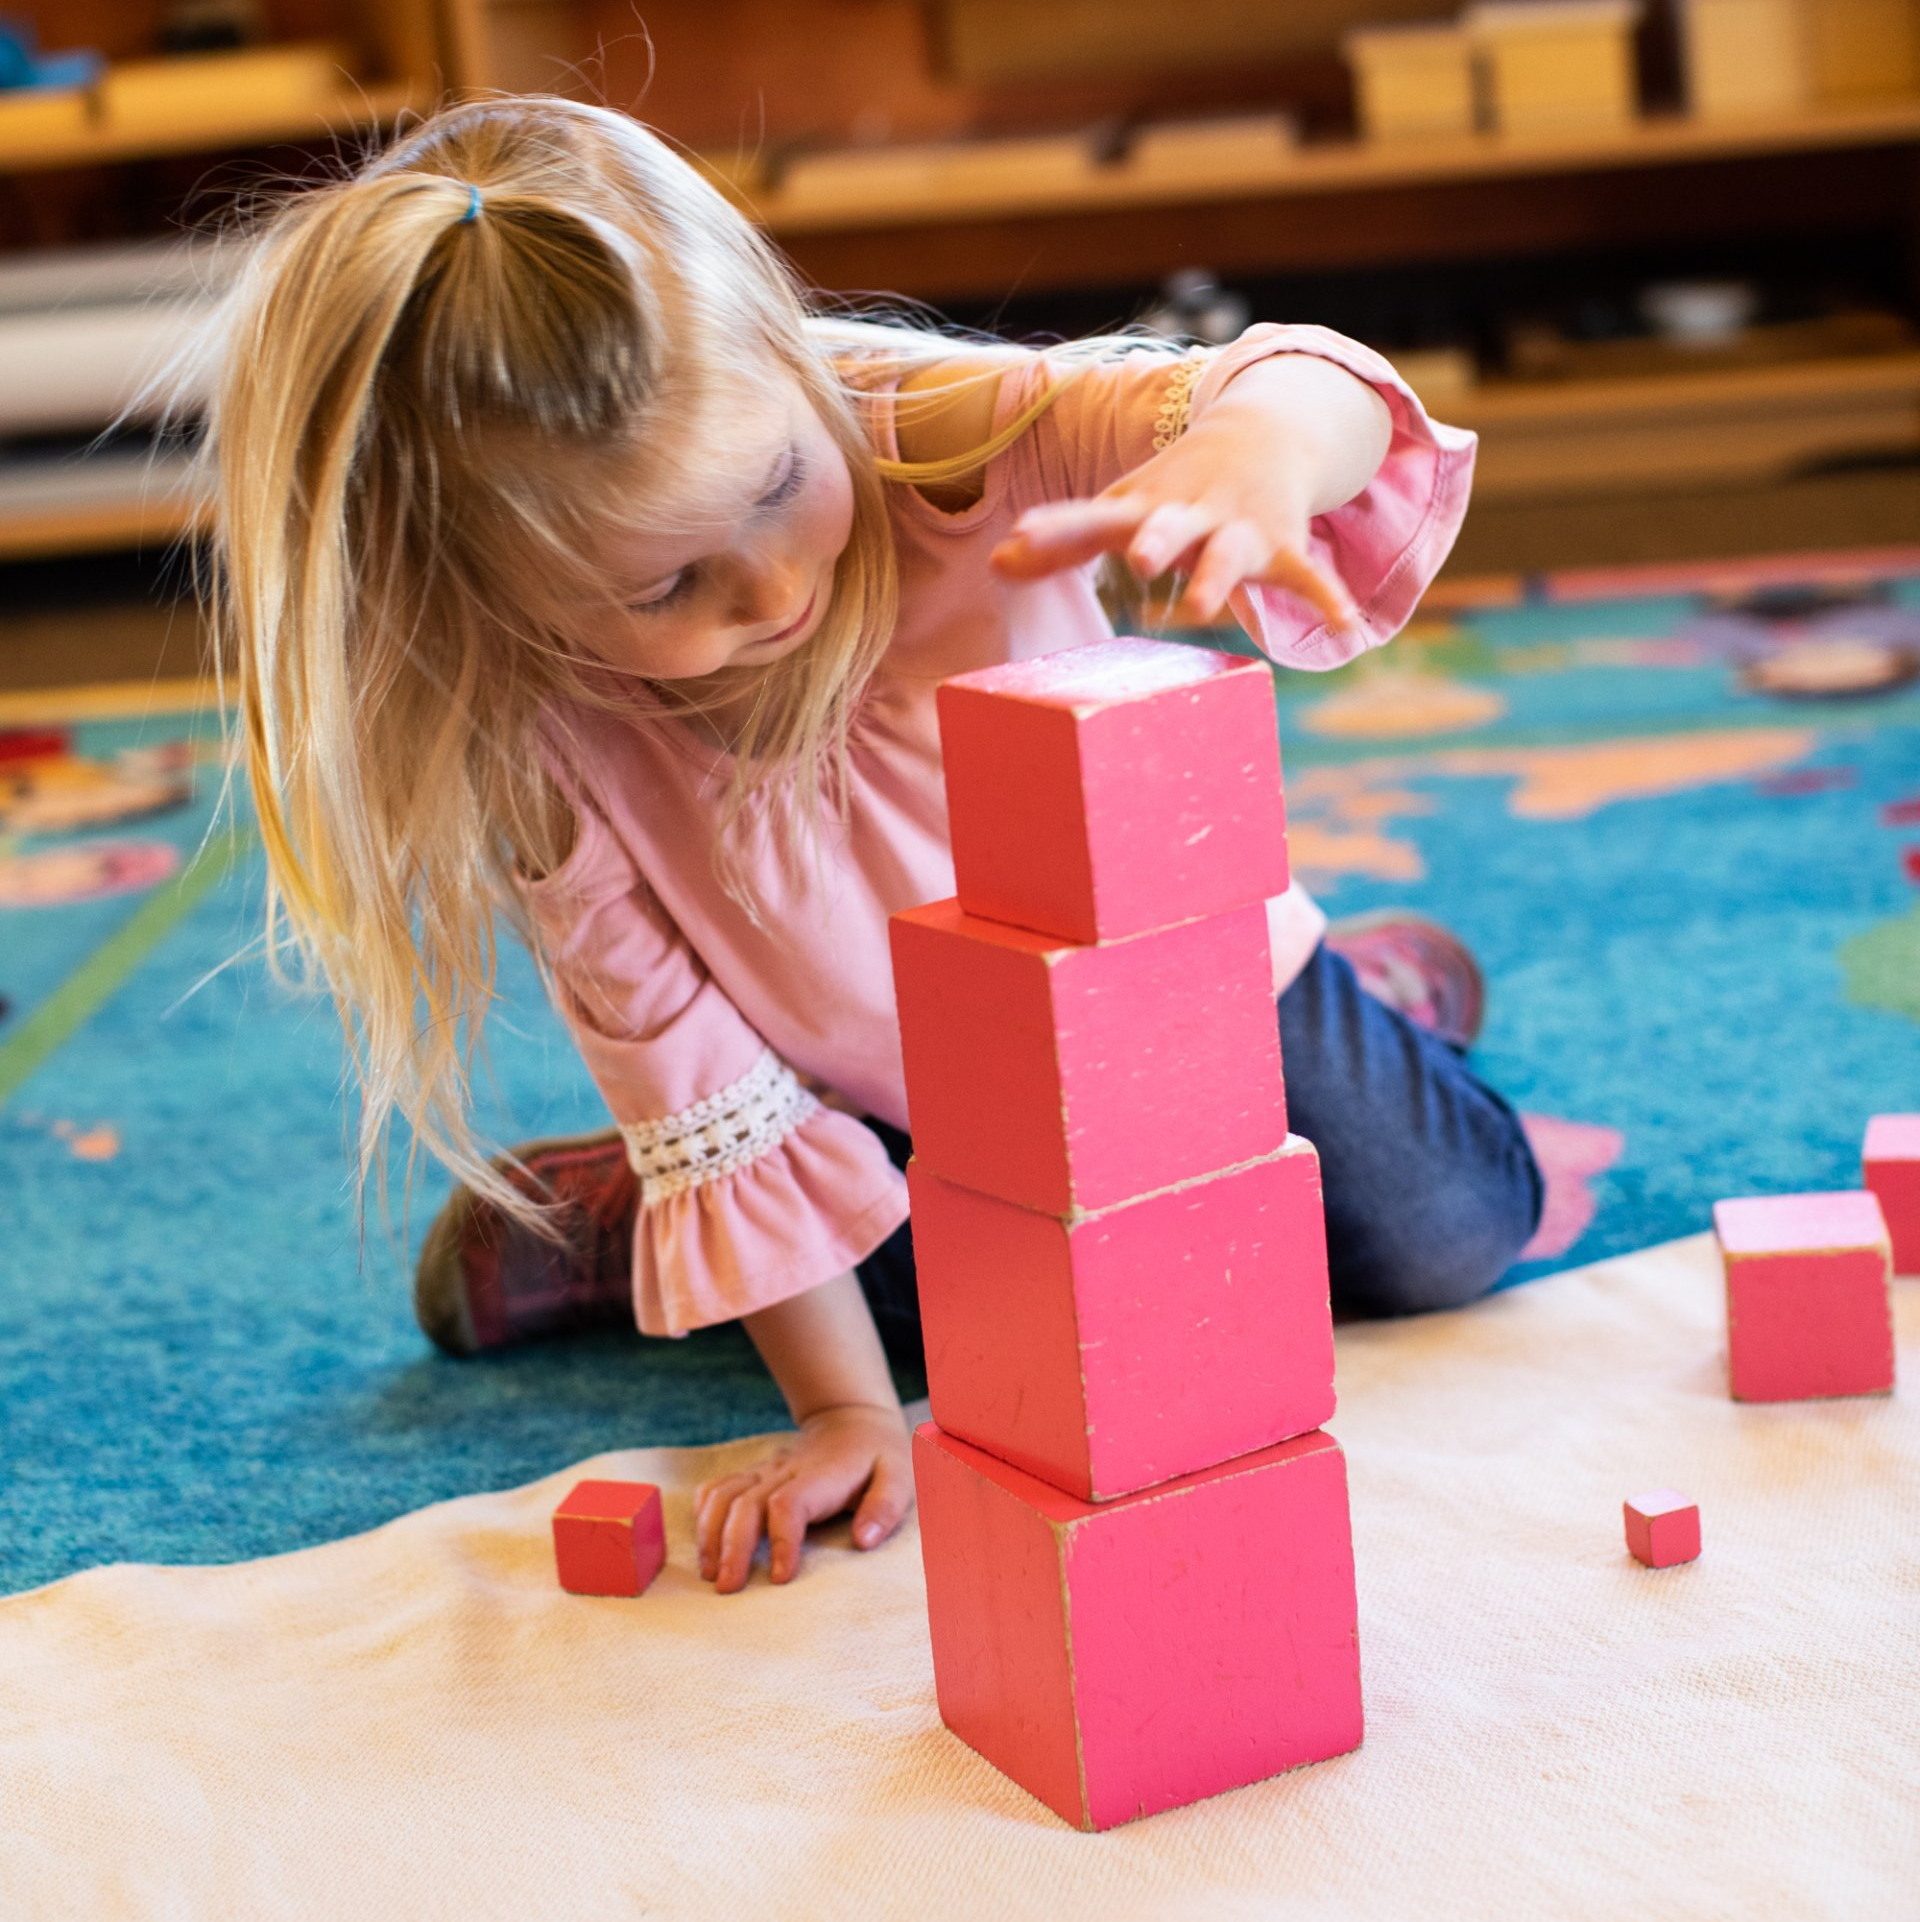 Child working with the Pink Tower